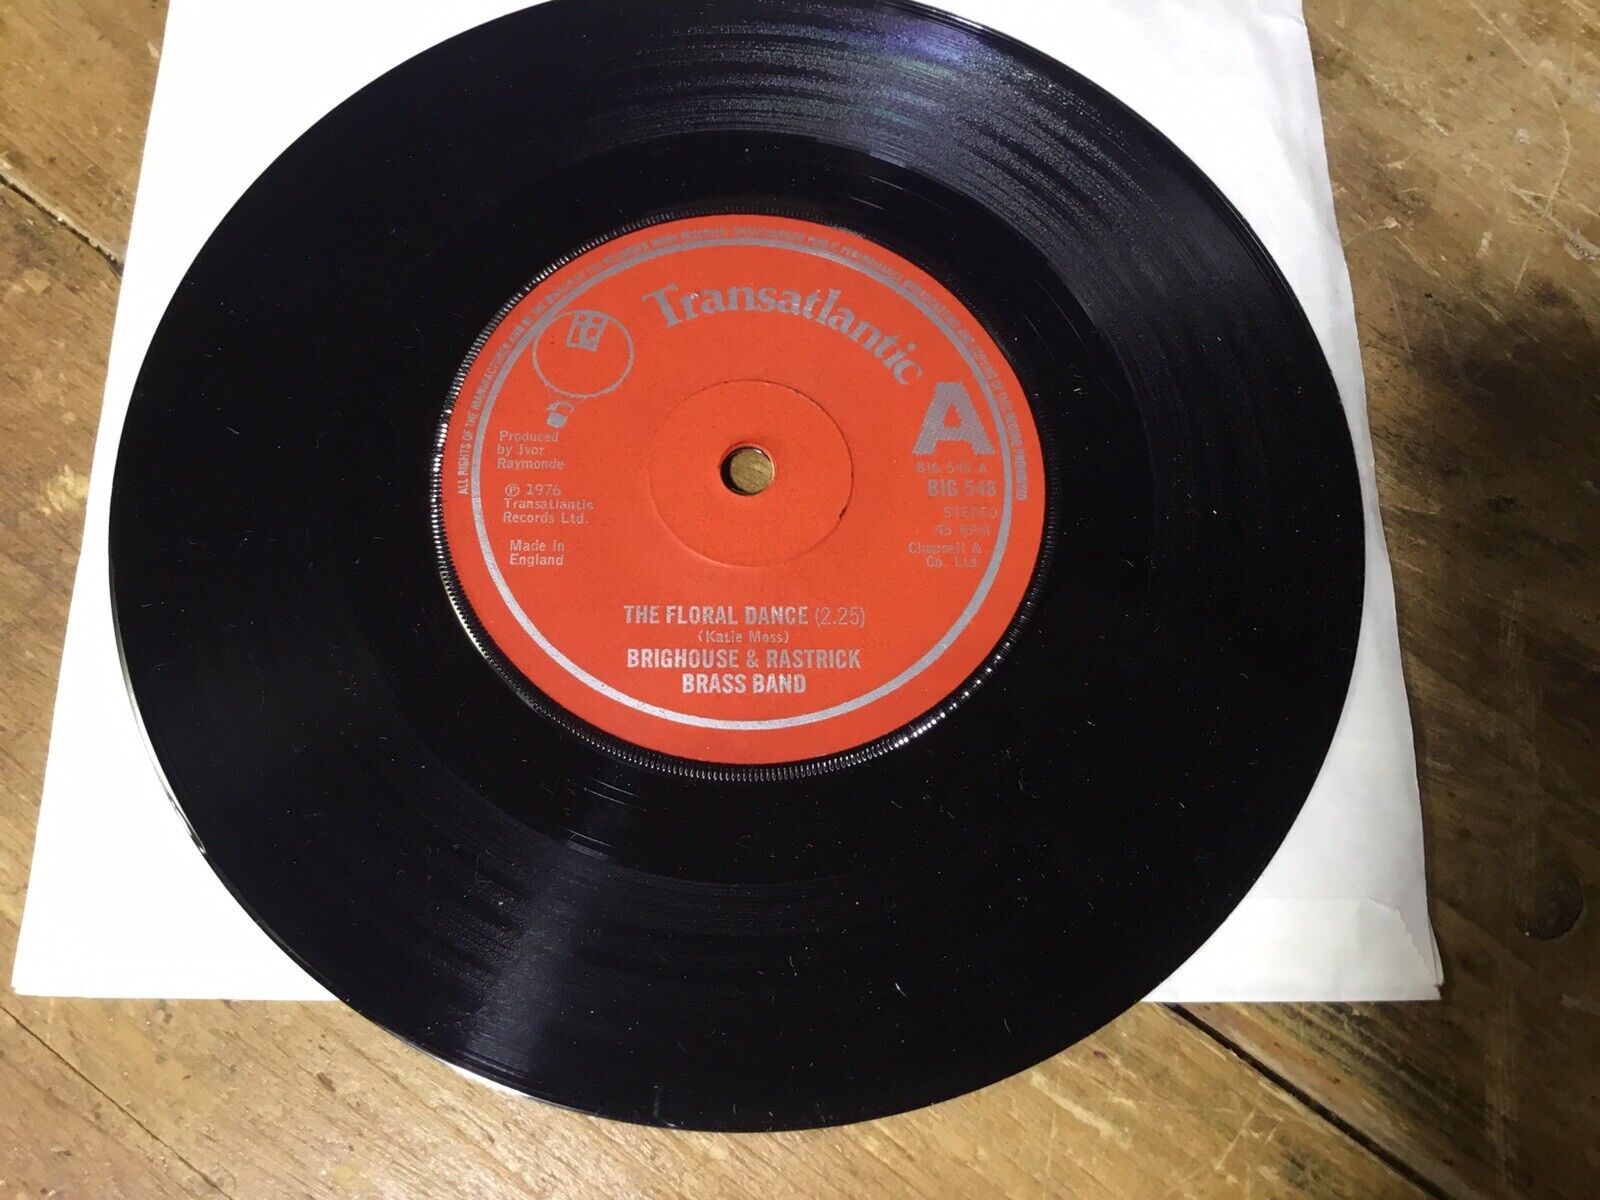 Vintage Vinyl Record ‘The Floral Dance’ By Brighouse & Rastrick Band, 7 Inch.